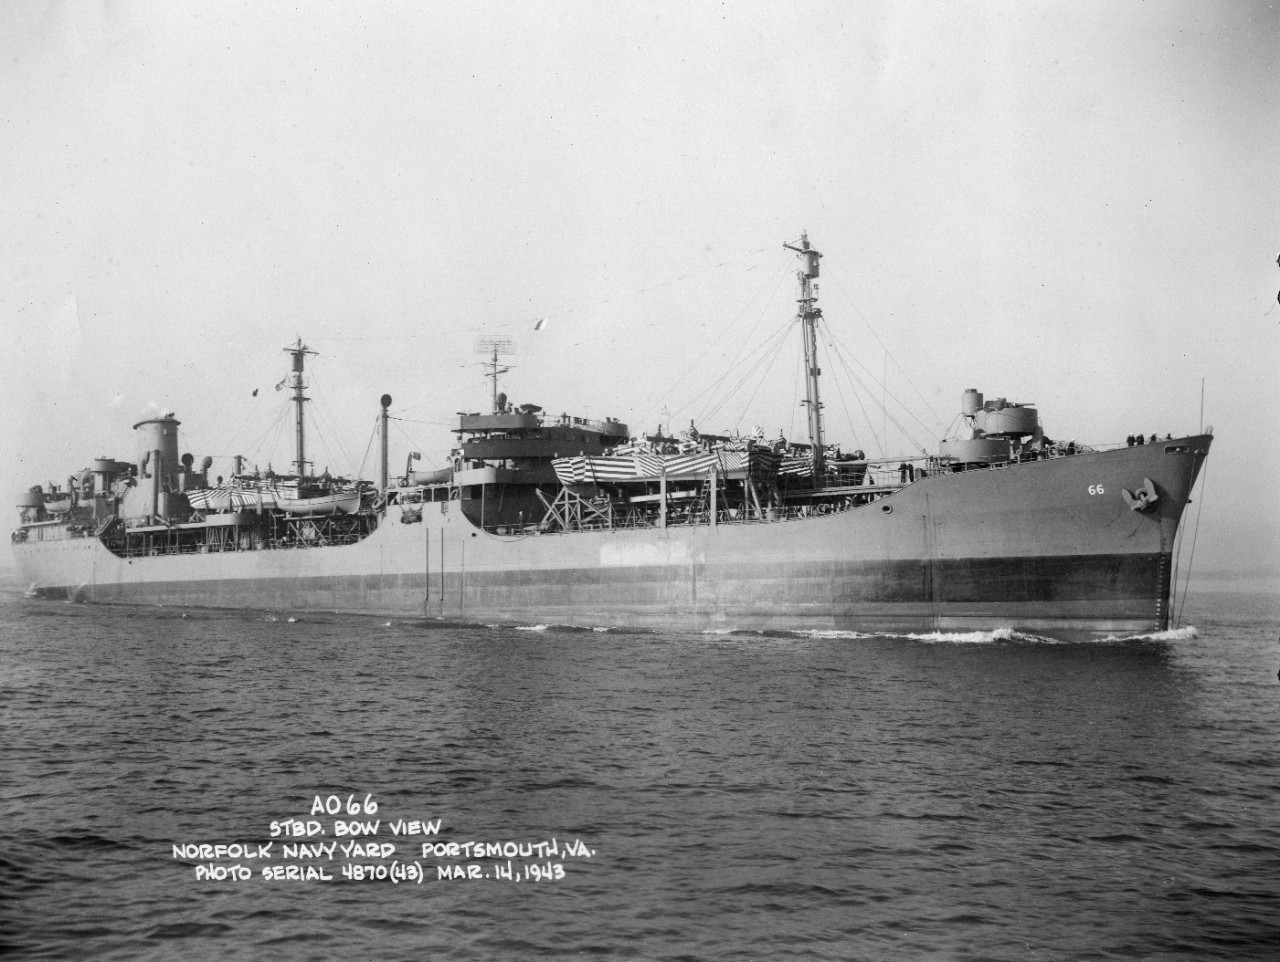 Starboard quarter view of USS Atascosa (AO-66) underway in light load condition with camouflaged PT boats as deck cargo fore and aft off the Norfolk Navy Yard, Portsmouth, VA, on 14 March 1943. She was the former S.S. Esso Columbia.